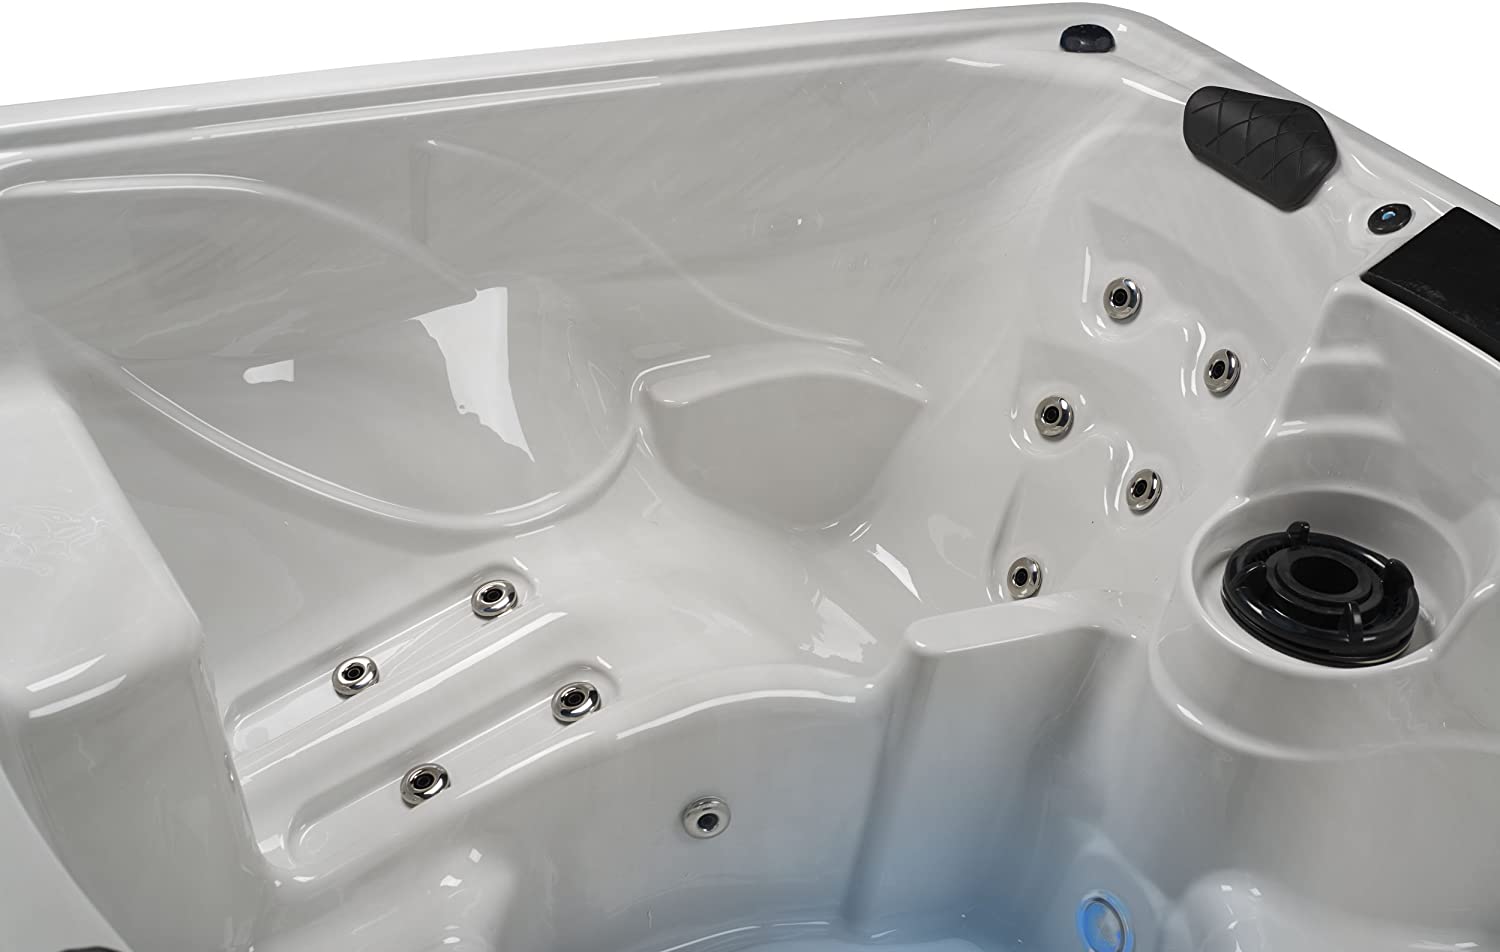 Essential-Hot-Tubs-30-Jets-Adelaide-Hot-Tub Lounge Chair Details